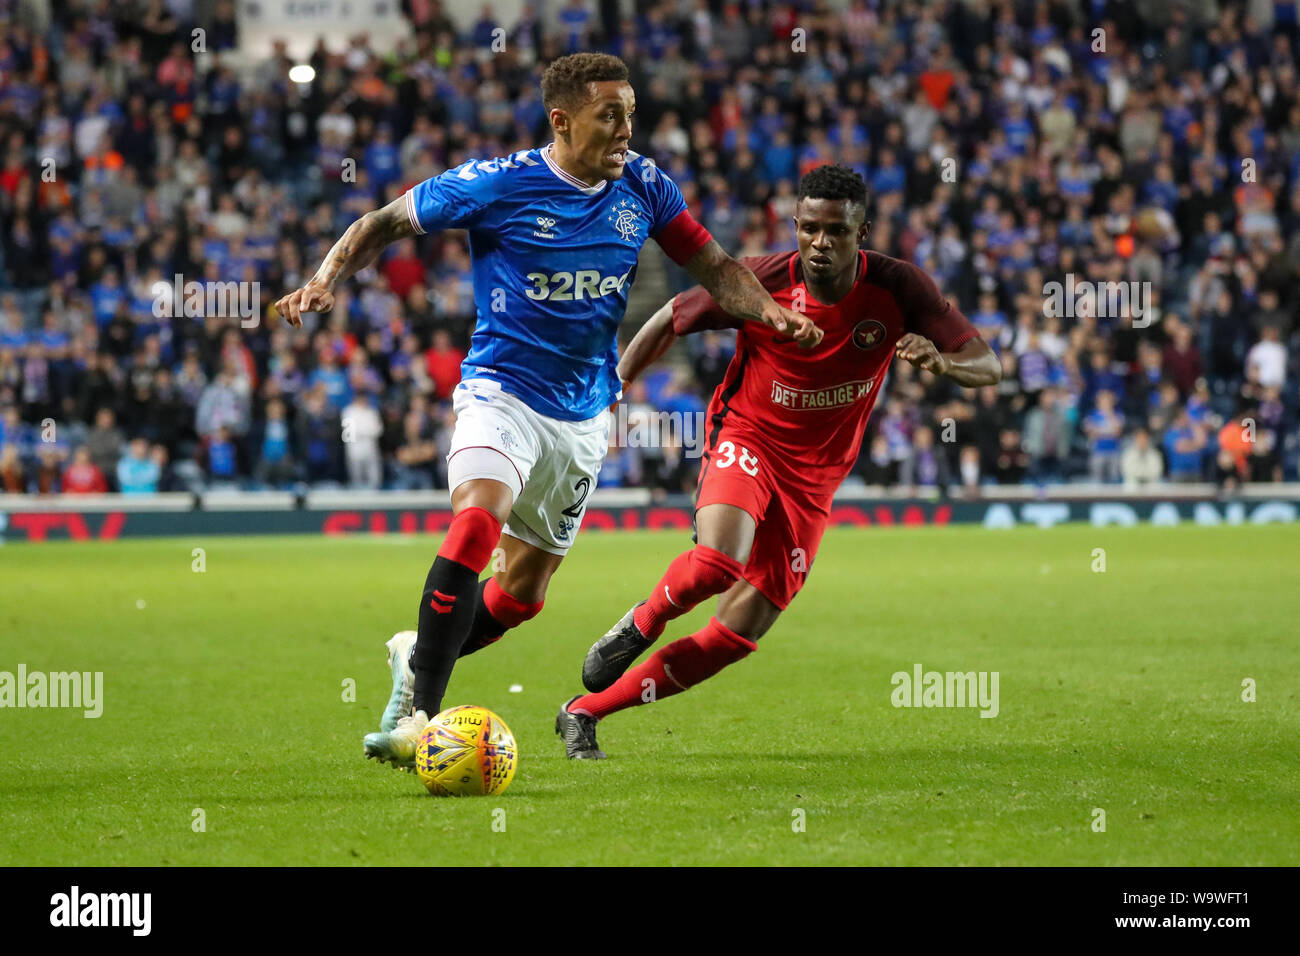 Glasgow, UK. 15th Aug, 2019. The third qualifying round of the UEFA EUROPA LEAGUE 2019/20 between Glasgow Rangers and FC Midtjylland was played at Ibrox stadium, Glasgow the home ground of Rangers who go into this round with a 4 -2 lead. Rangers won 3 -1 to go through to the next round. Credit: Findlay/Alamy Live News Stock Photo